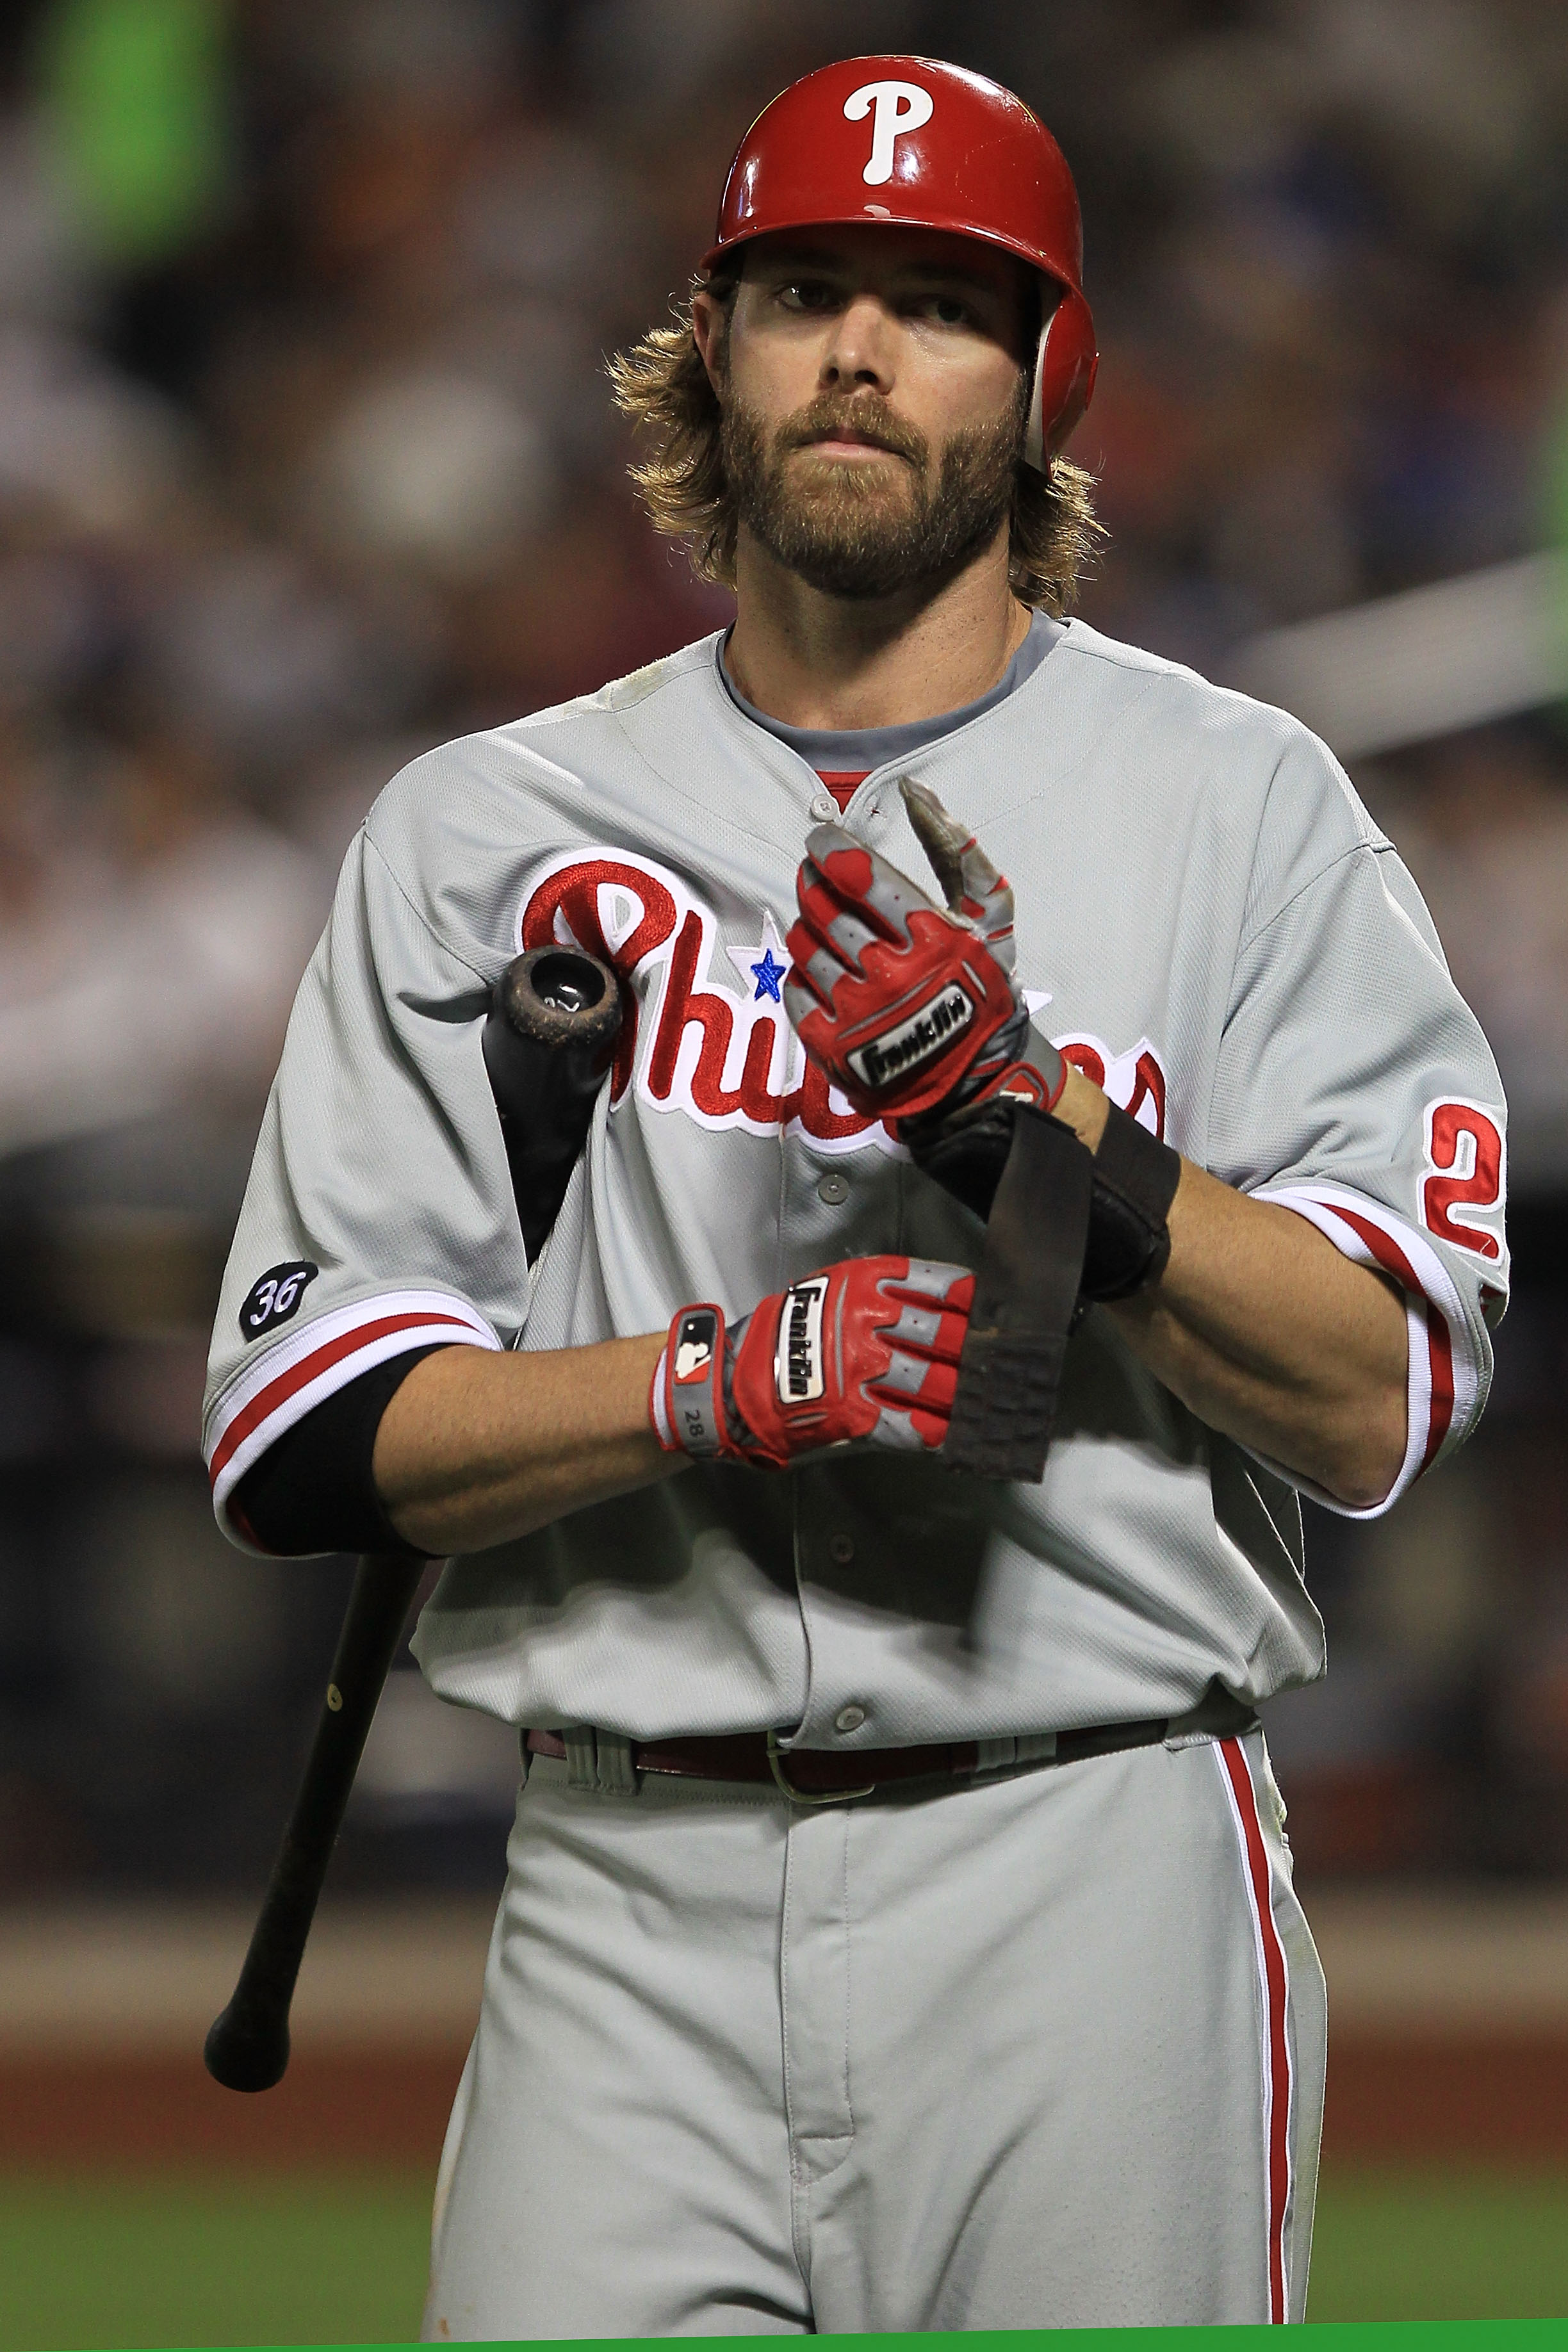 Jayson Werth contract startling even for baseball – Delco Times